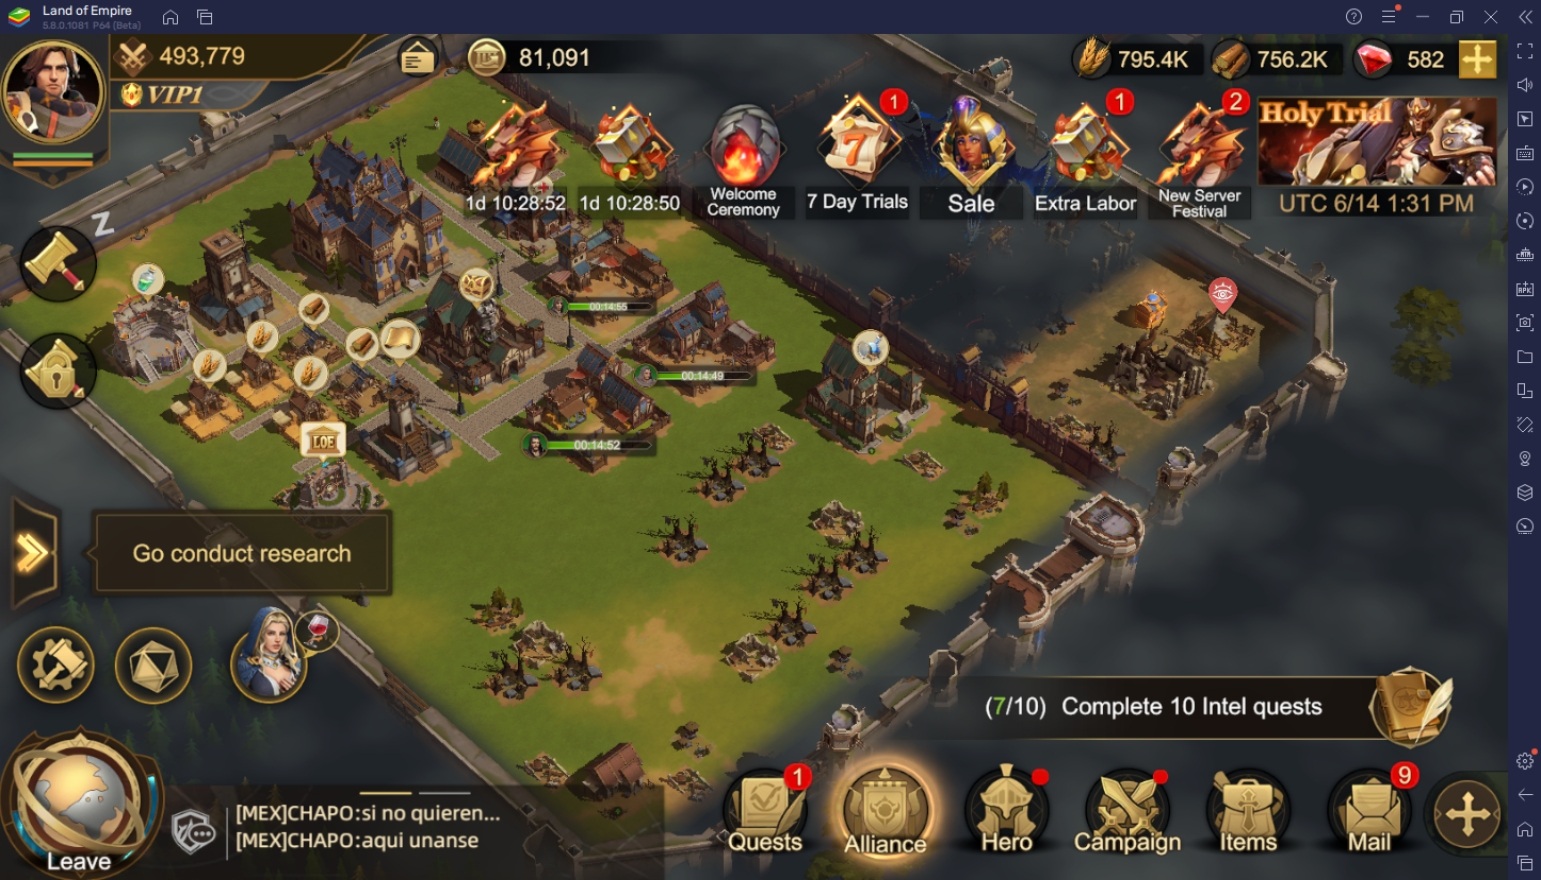 Tips & Tricks to Playing Land of Empires: Immortal